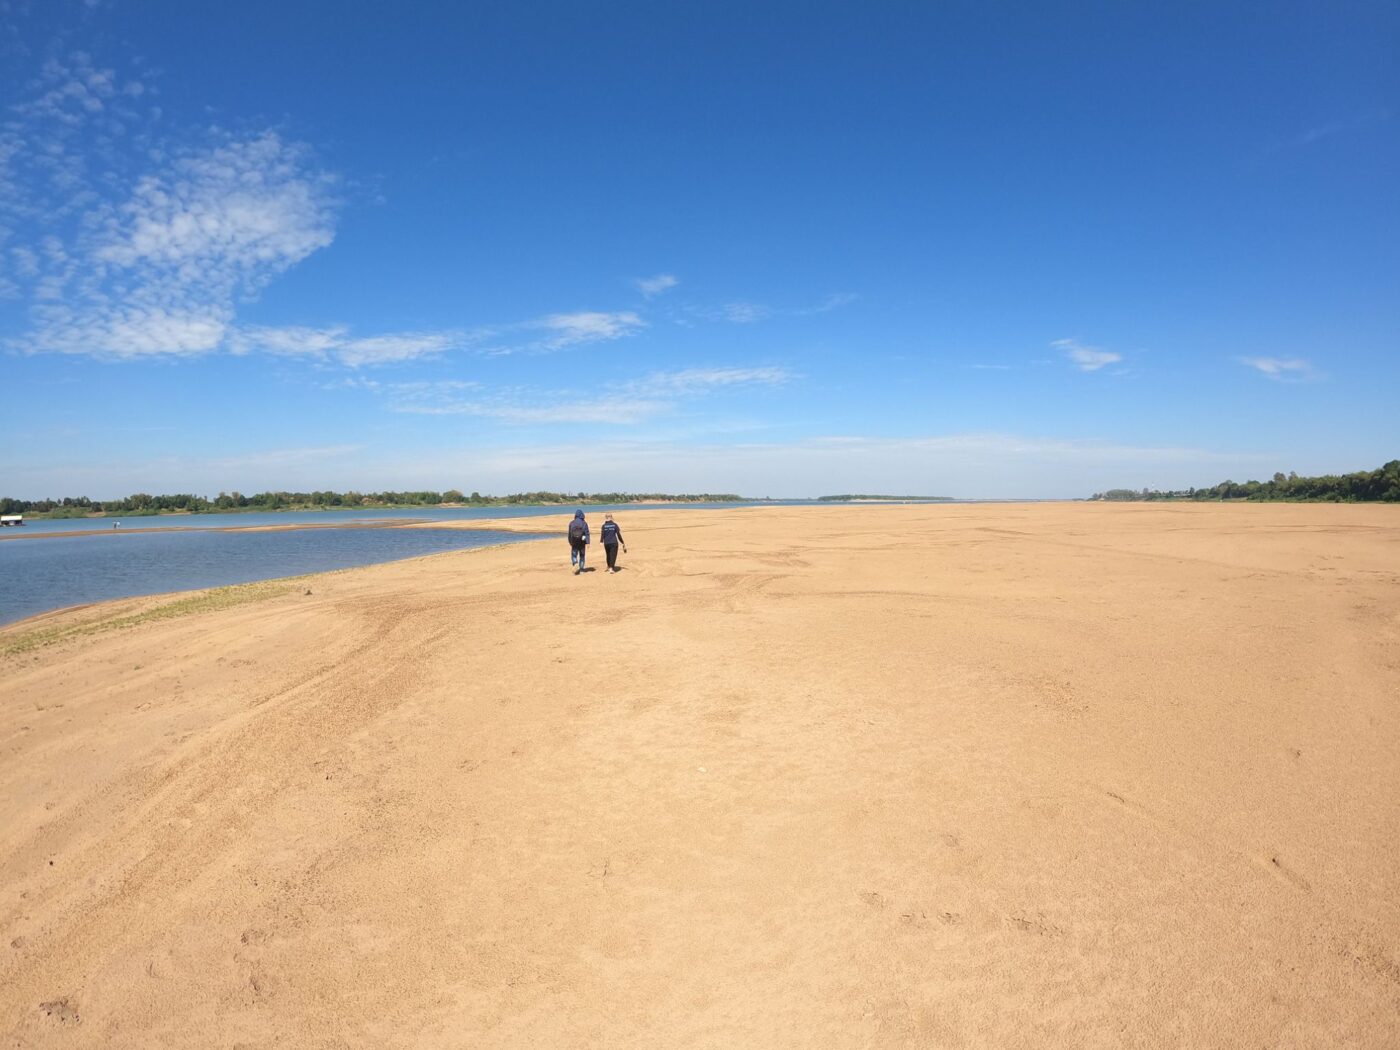 Two people walking along large sand bar in Cambodia